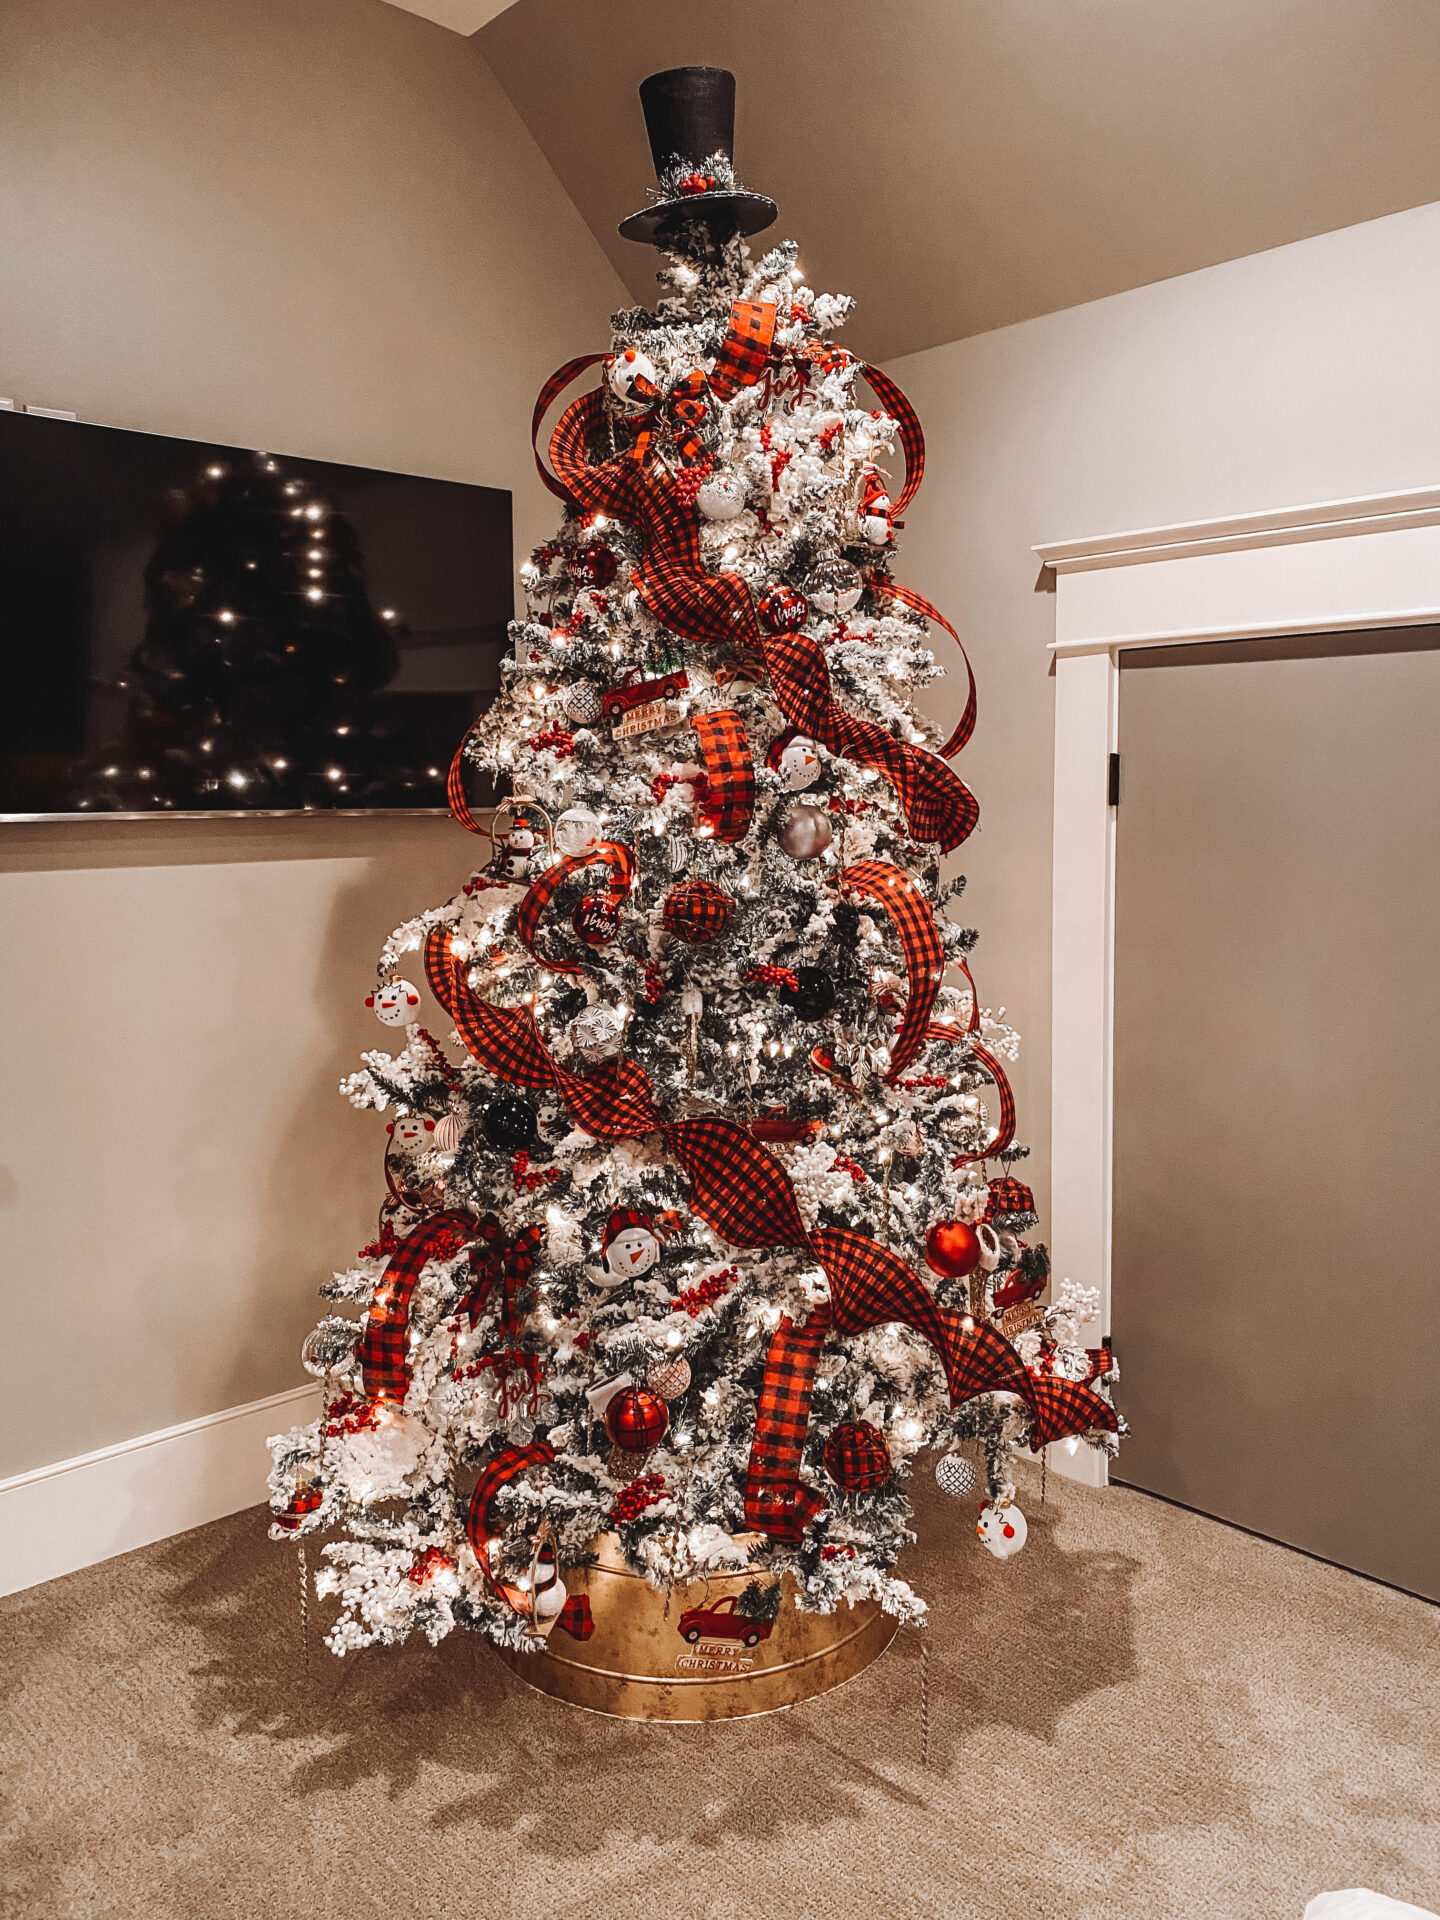 Big Lots Christmas decor - affordable holiday decorations by home lifestyle blogger Angela Lanter